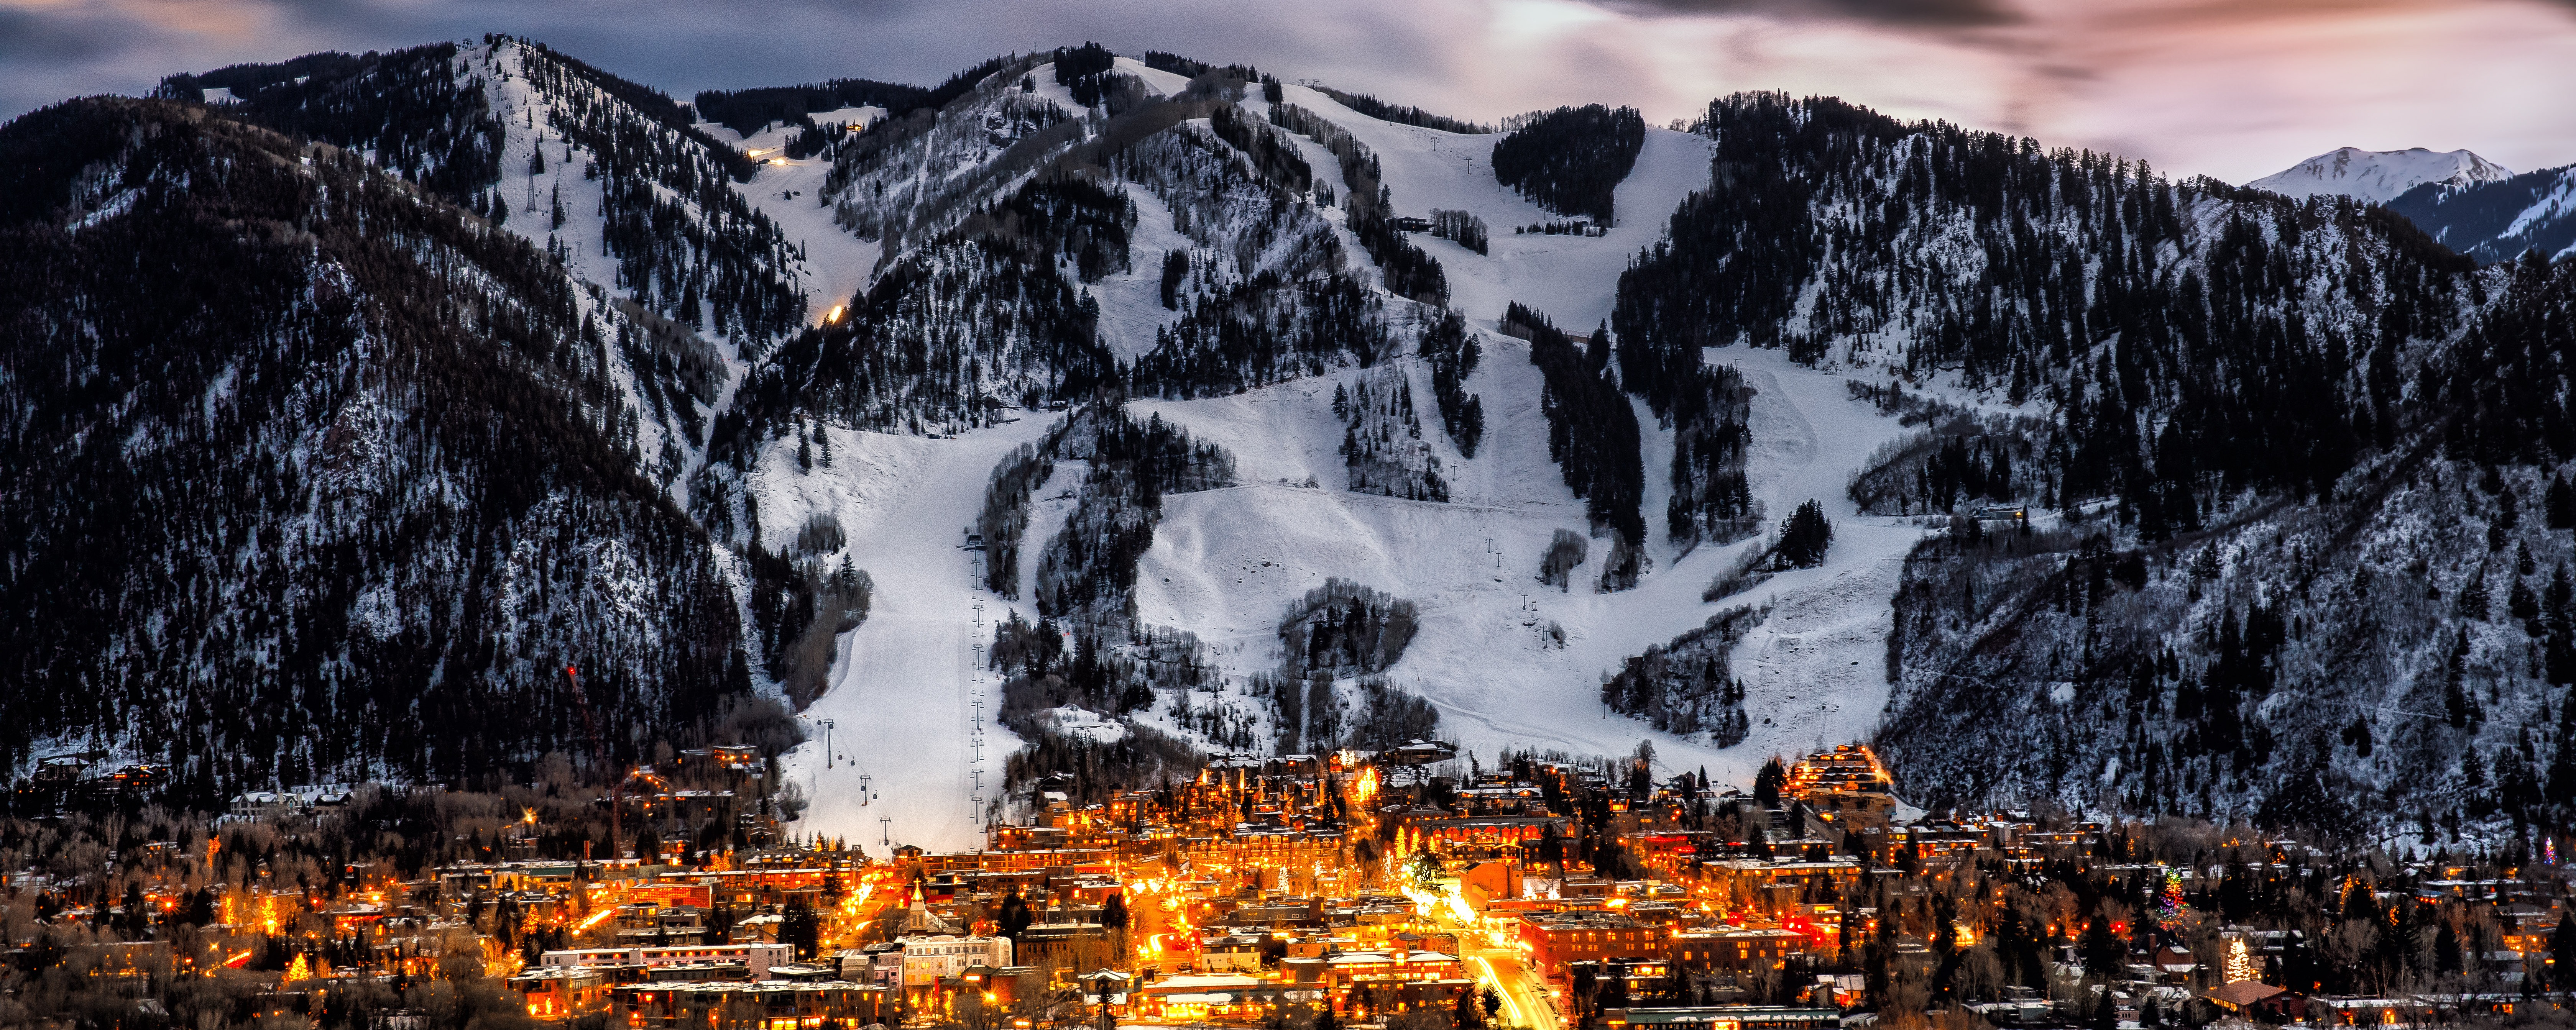 10 of the Best Ski Resorts in USA & Canada